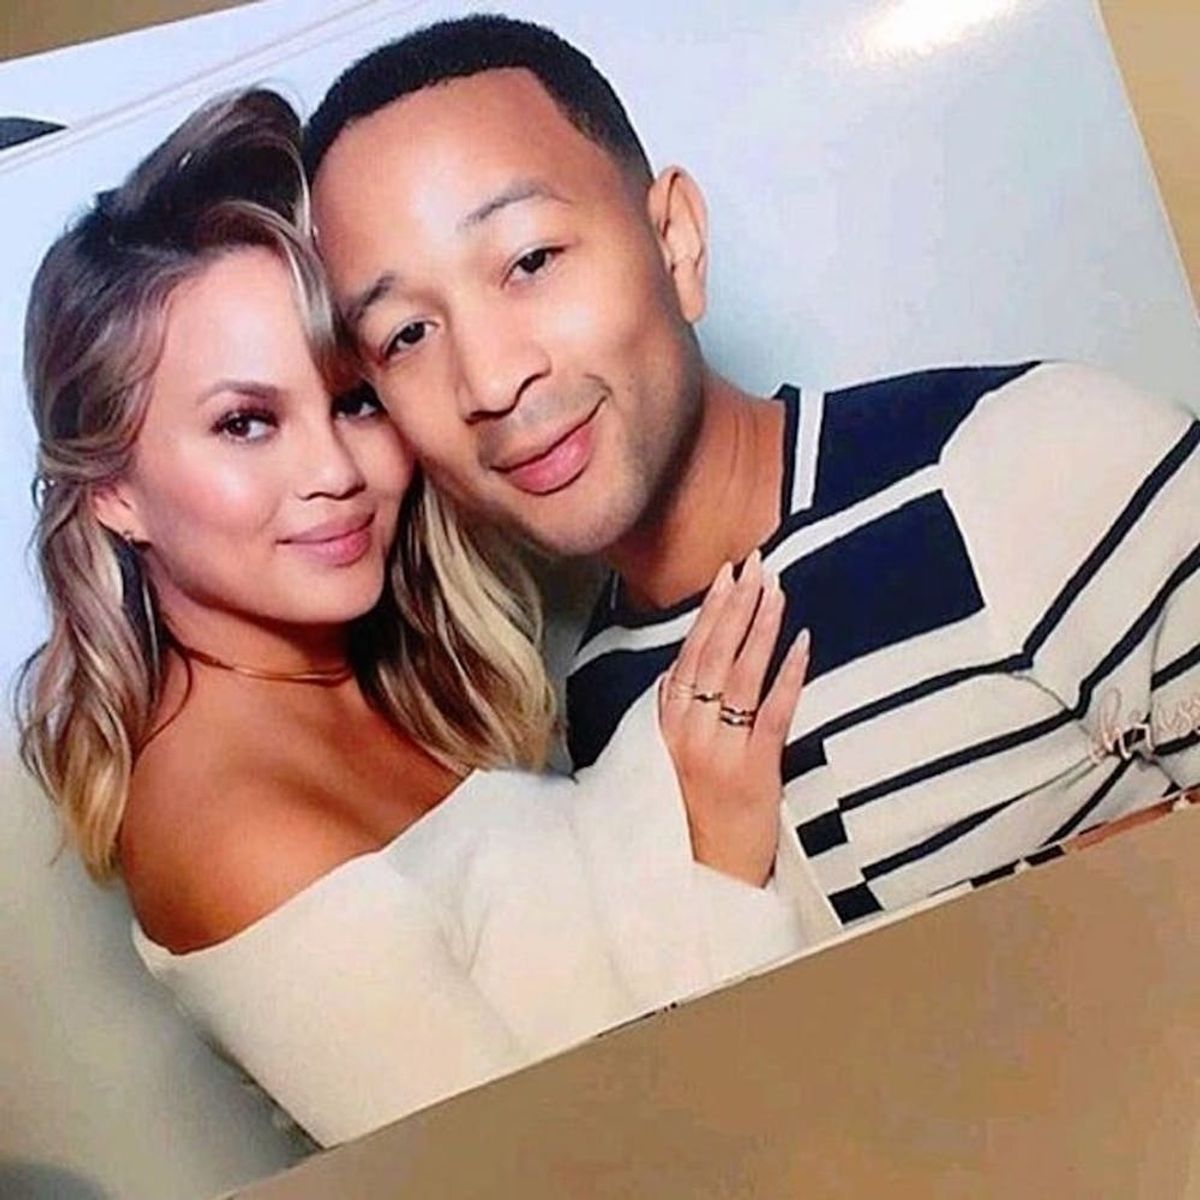 You’ll Never Guess Which Fast Food Restaurant Catered Chrissy Teigen’s Baby Shower